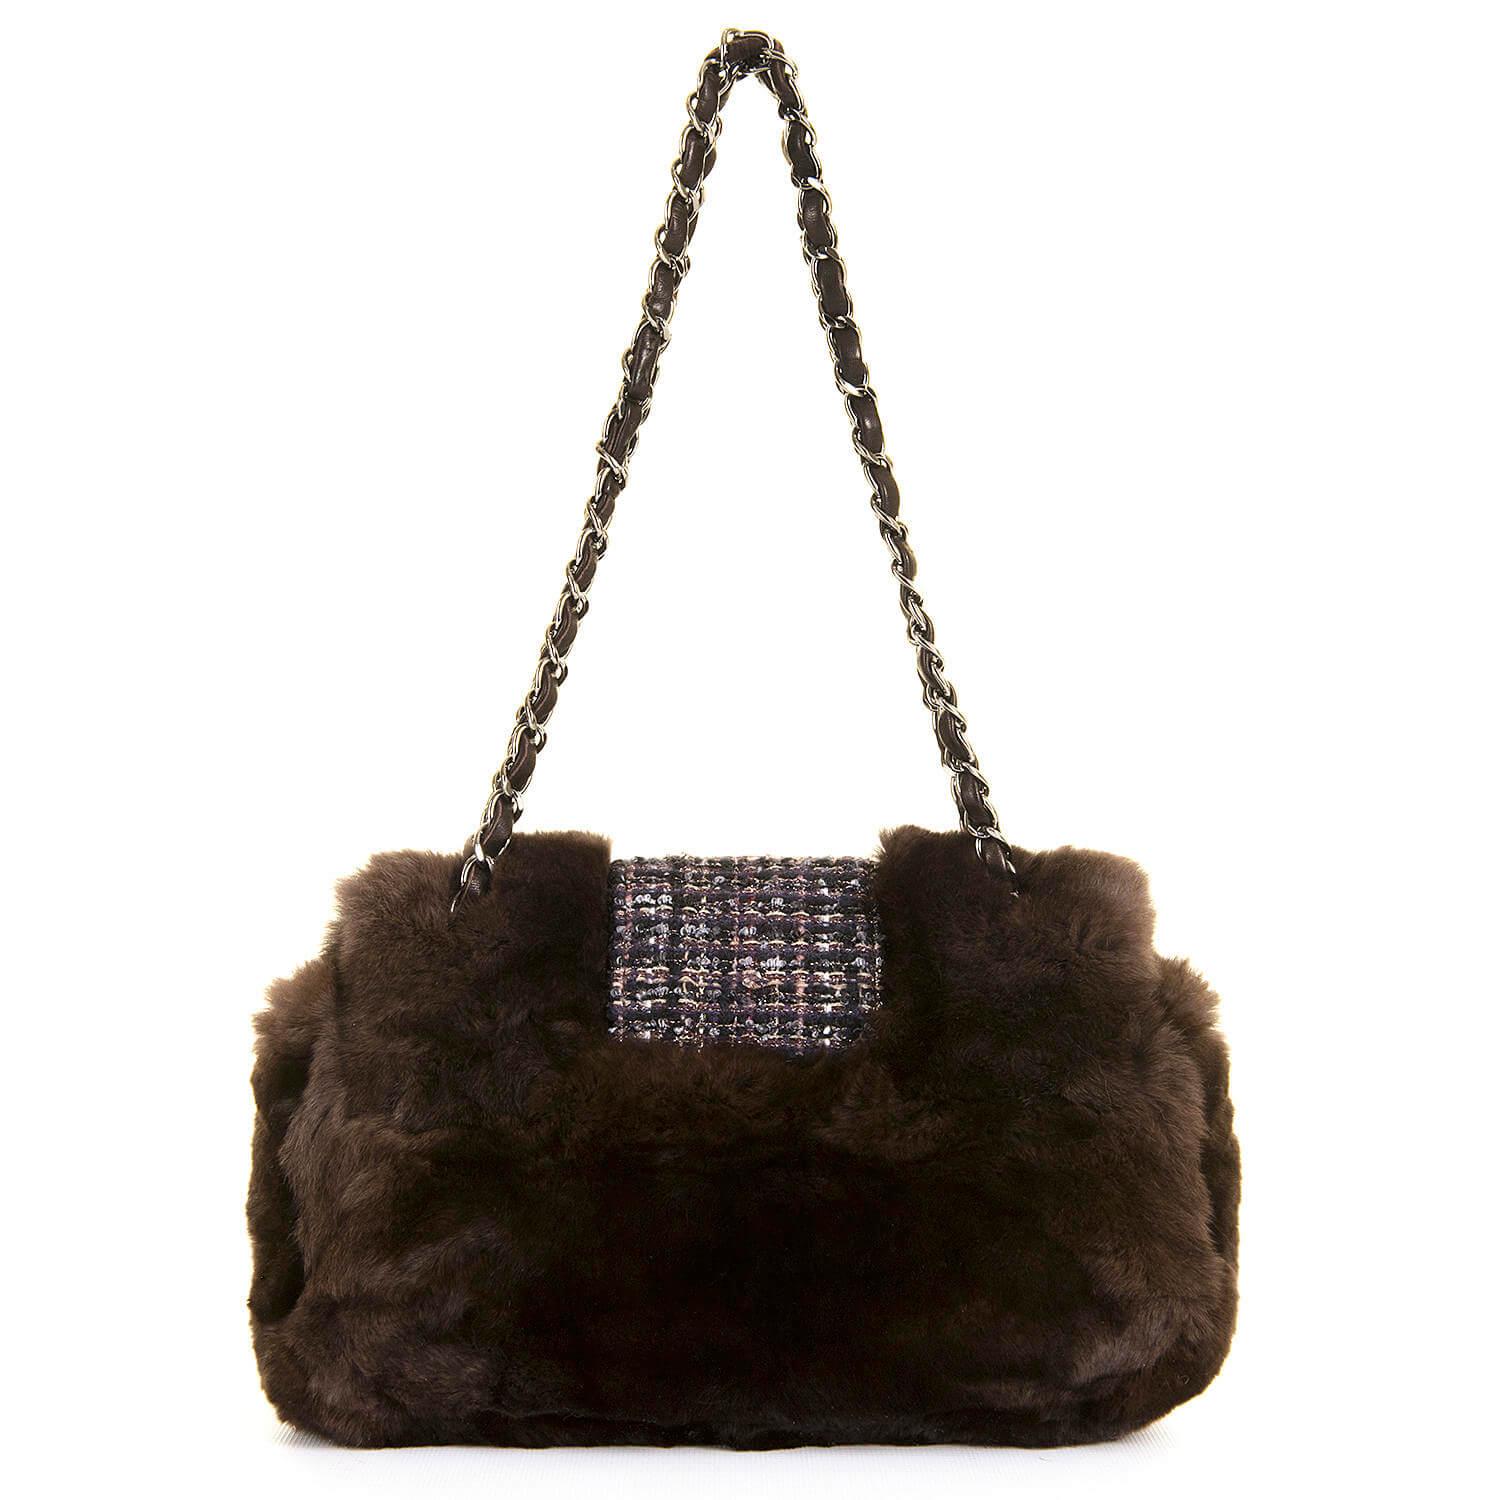 A Rare, Limited Edition, ' Sac Classique' Shoulder Bag by Karl Lagerfeld for Chanel, finished in Choclate Brown Fur with pastel check Tweed, accented with Silver Palladium hardware. The flap is fitted with a 'Madamoiselle' clasp with the interior of